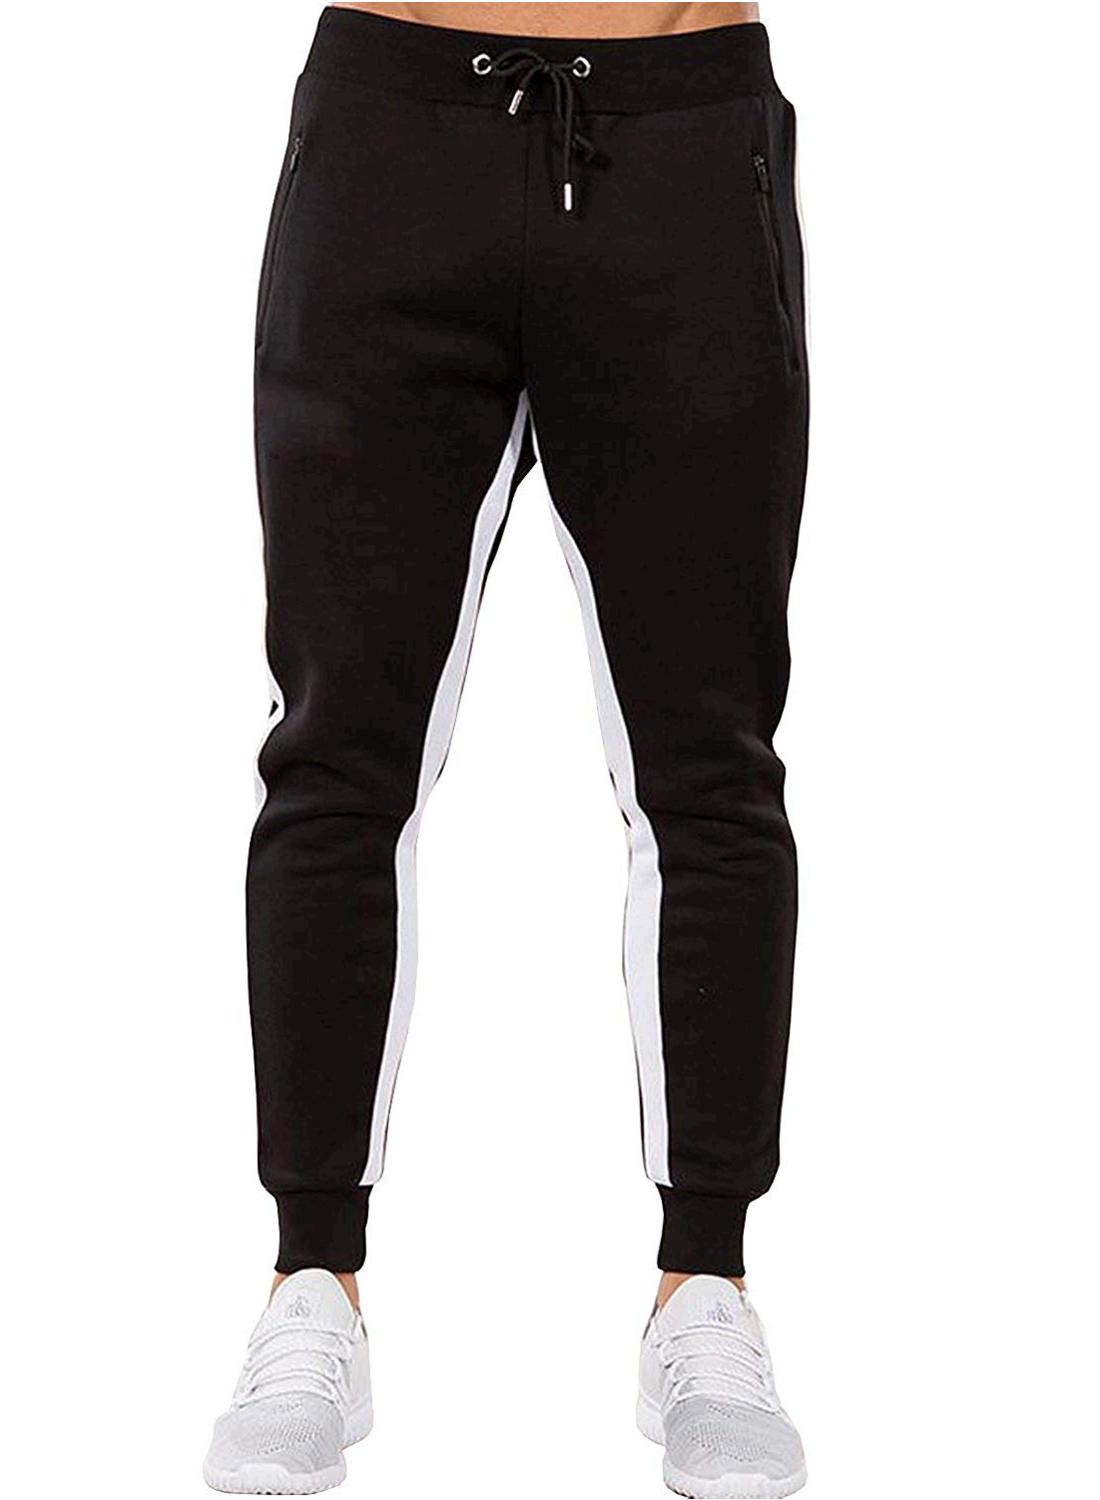  Ouber Workout Pants for Build Muscle